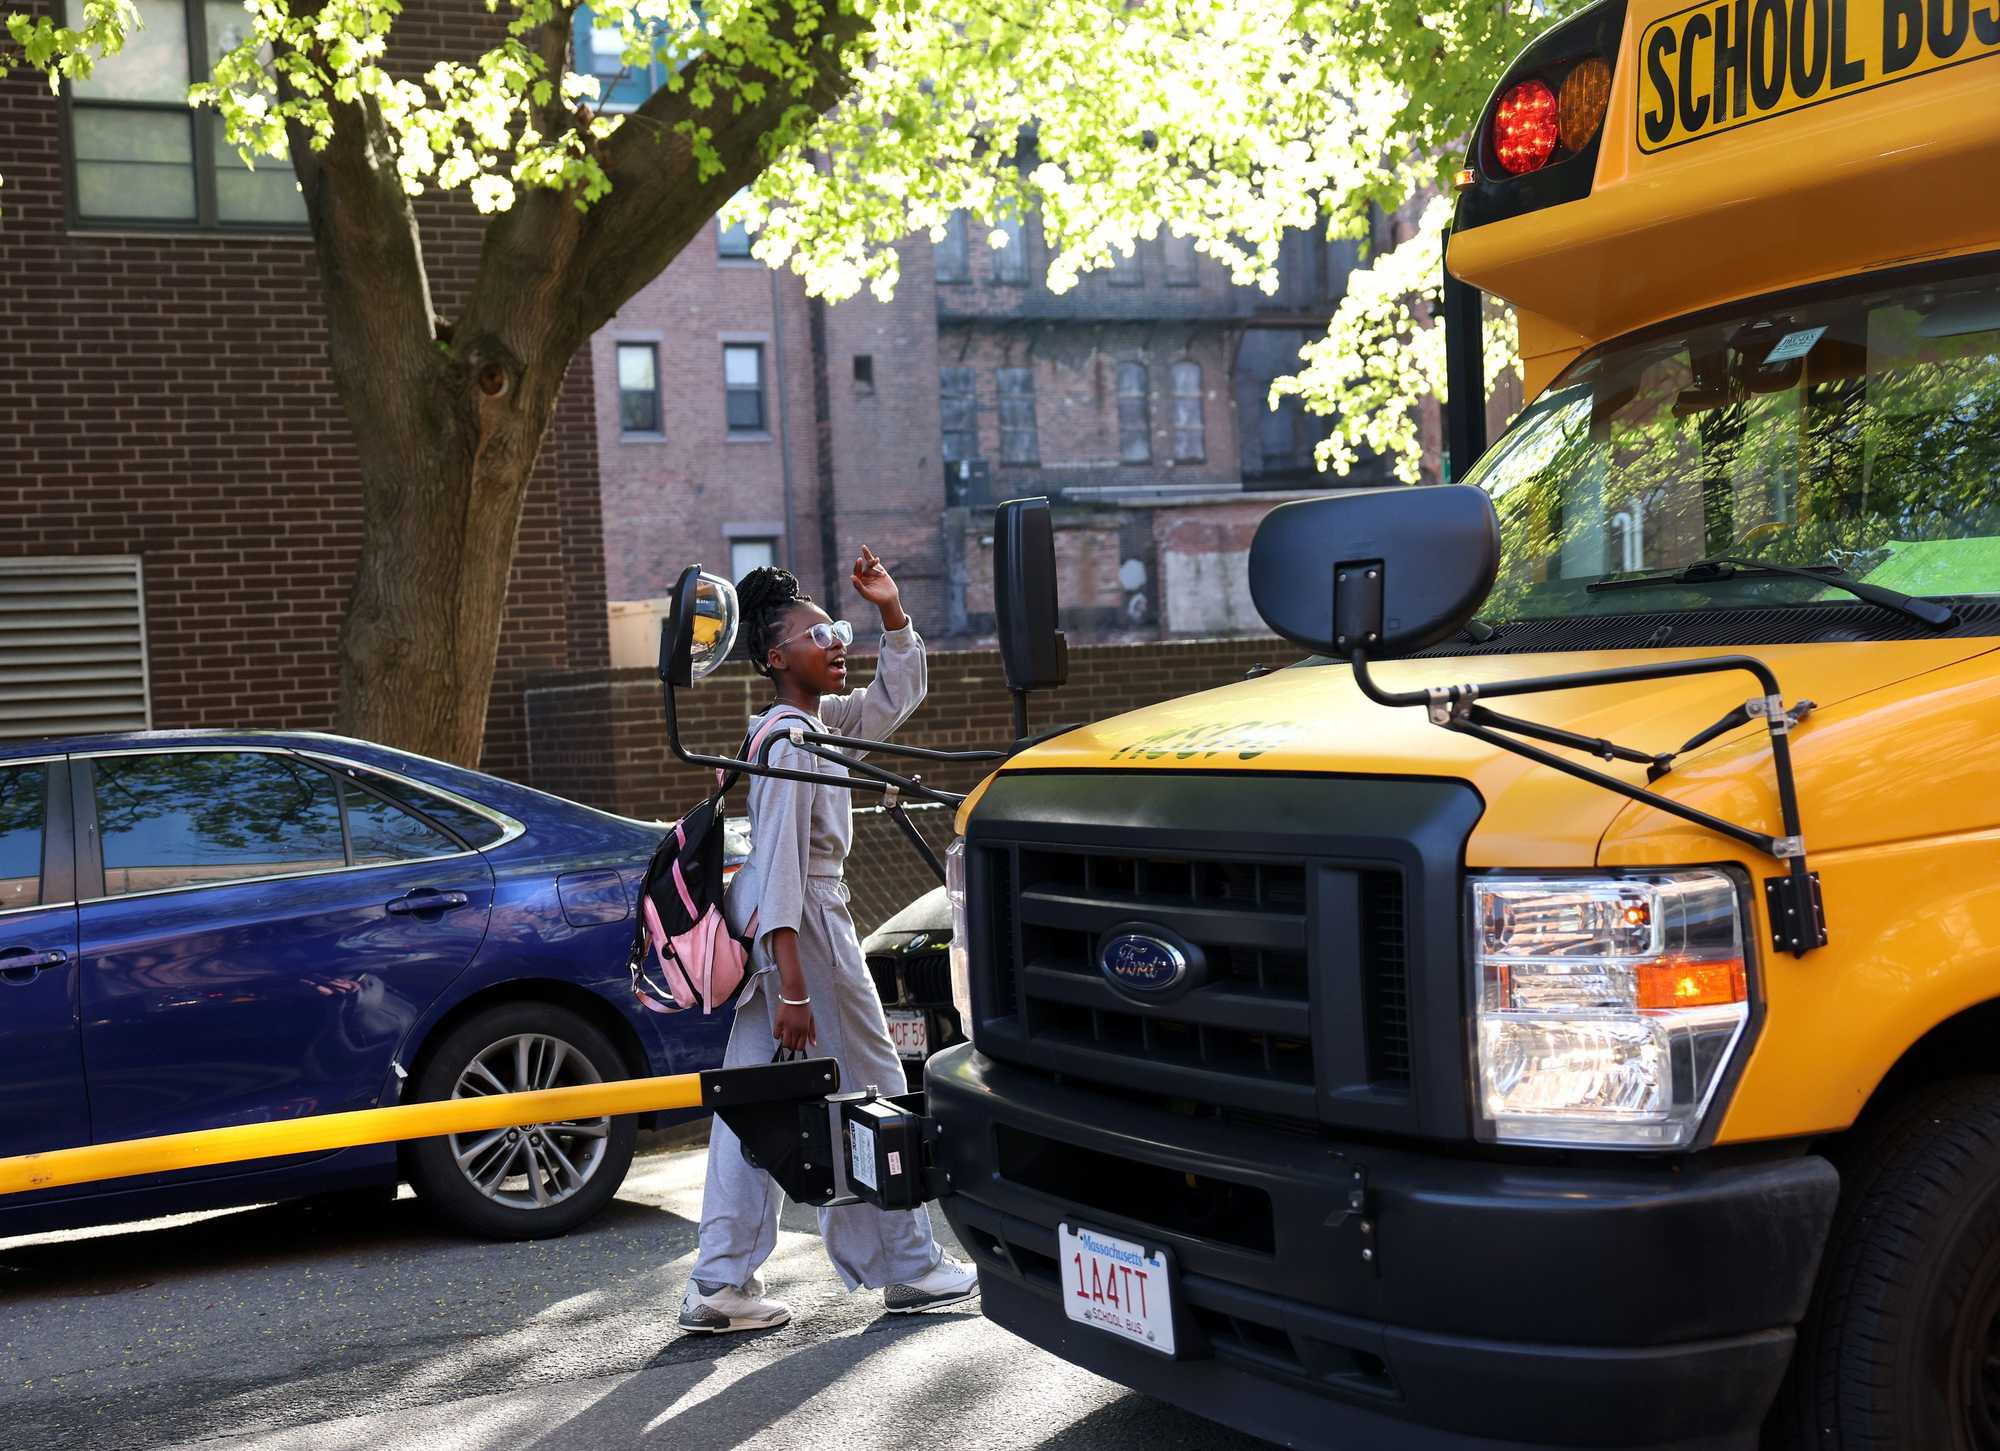 Soneia Bowens's daughter, Laren, 12, waved as she got on the bus to go to school. 
